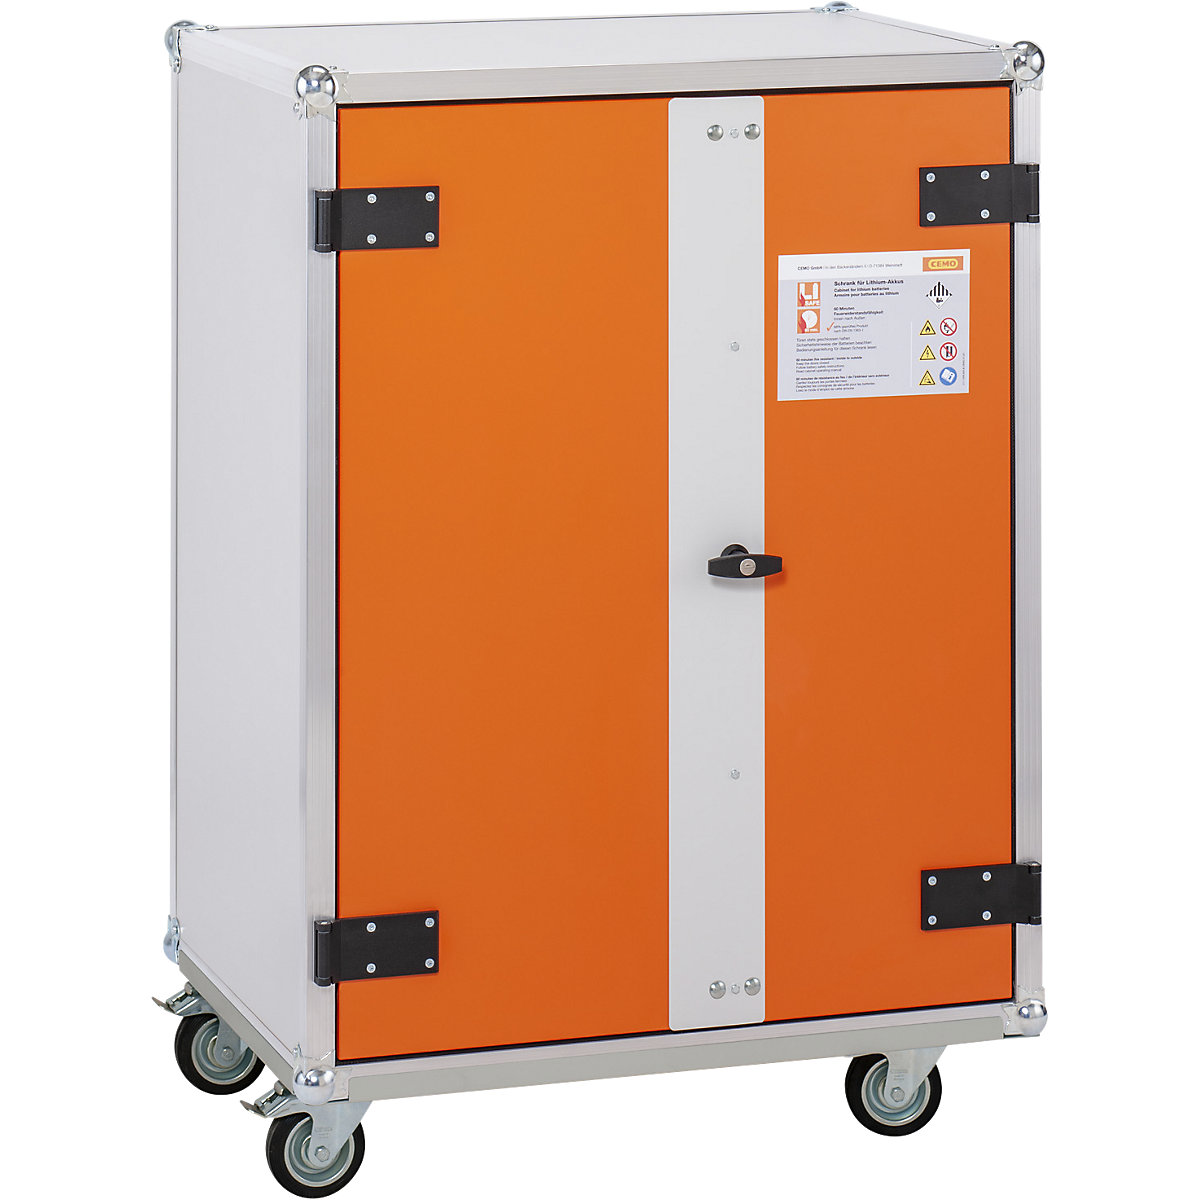 PREMIUM safety battery charging cabinet – CEMO, with castors, height 1150 mm, 230 V, orange/grey-1